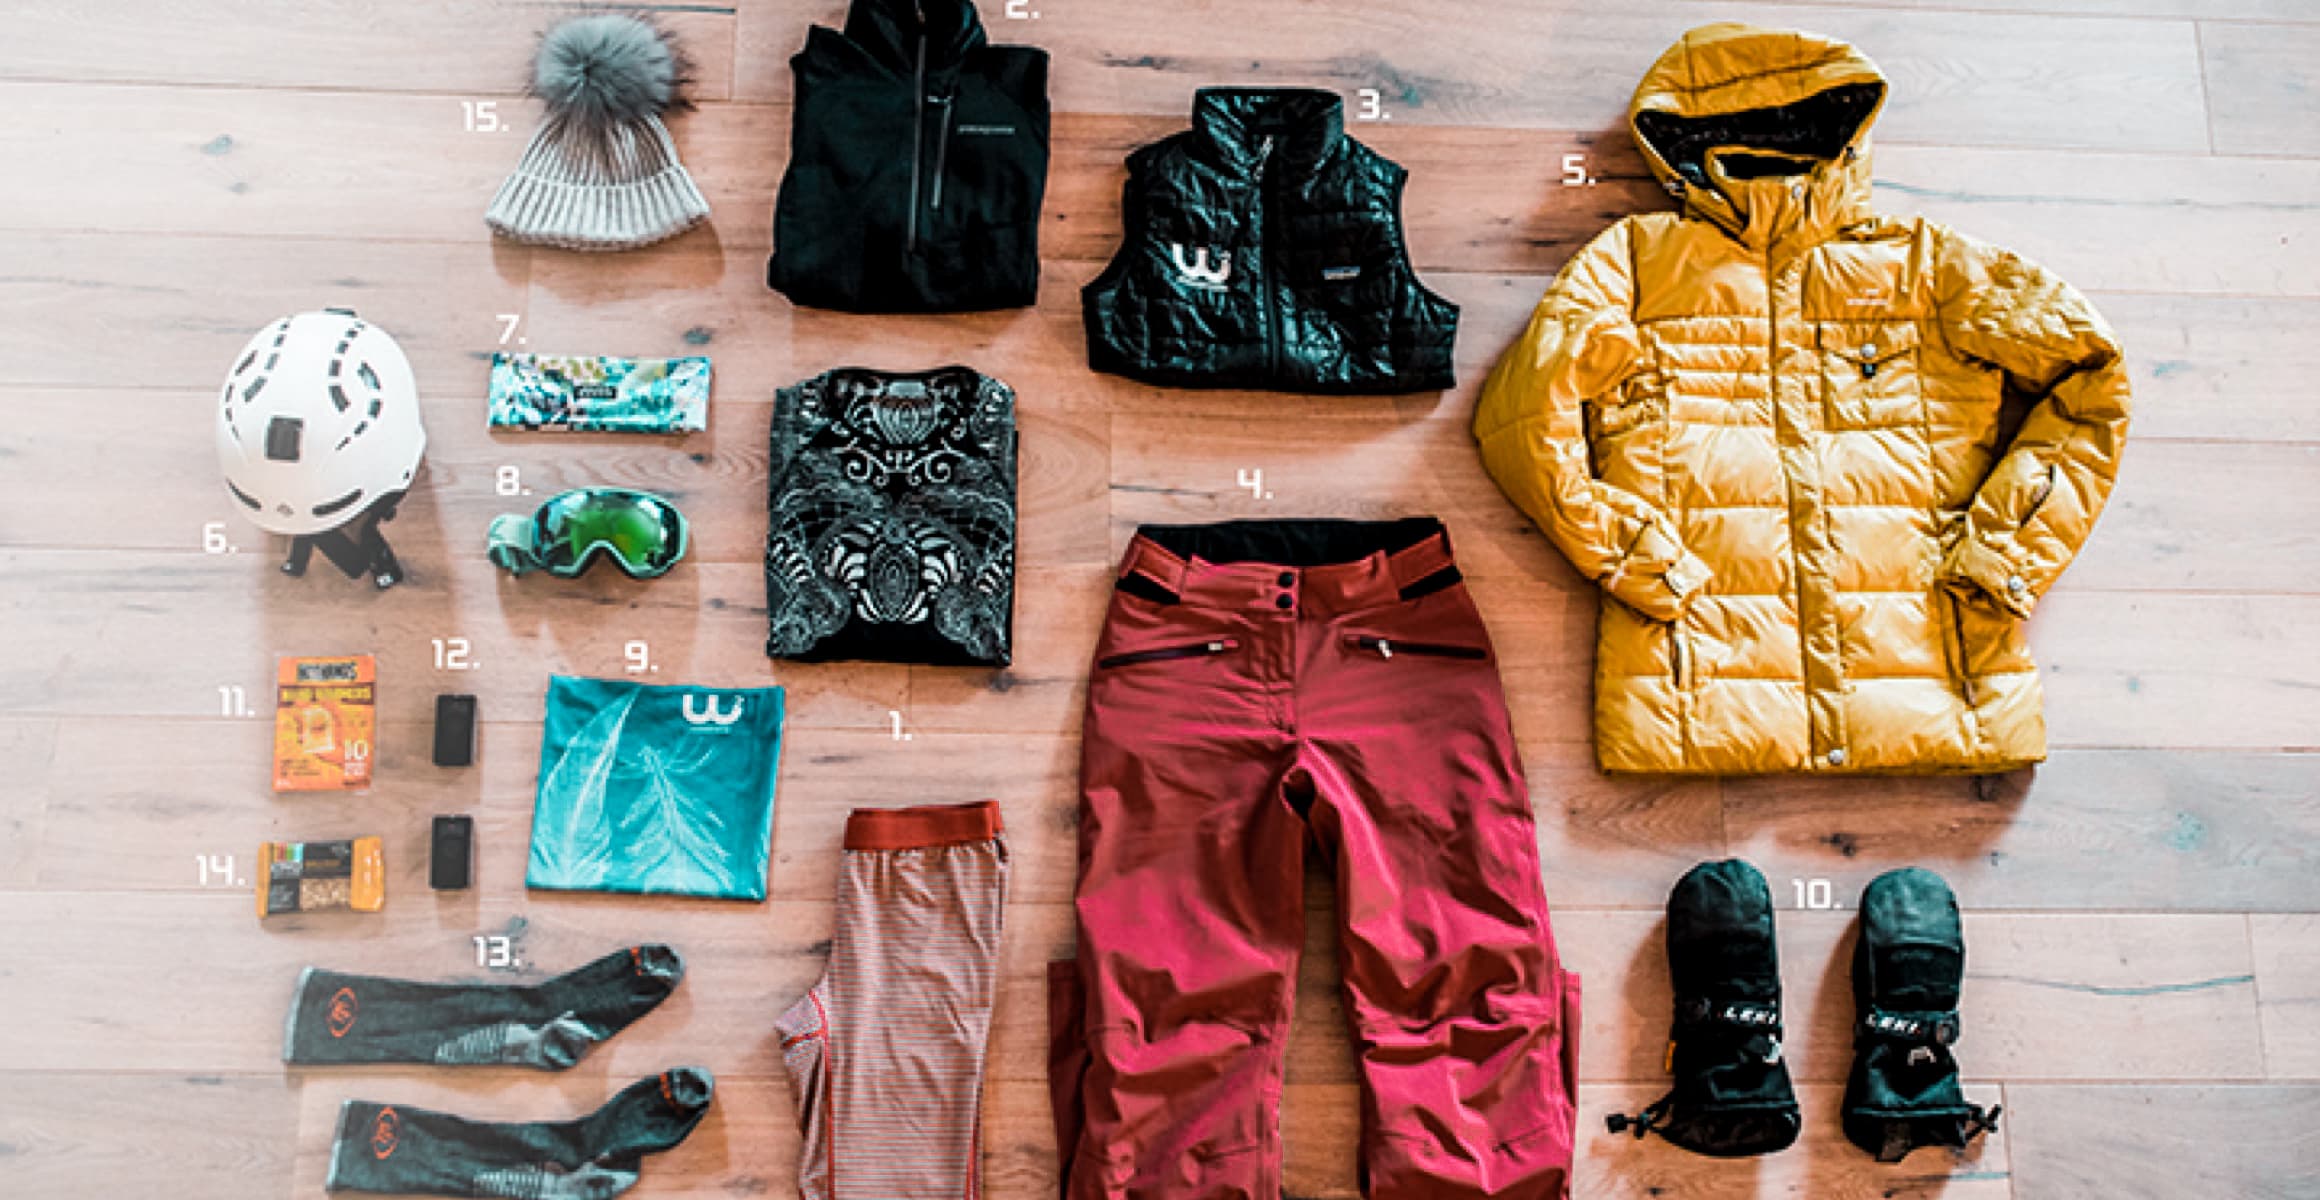 HOW TO DRESS FOR COLD WHEATHER SKIING, en